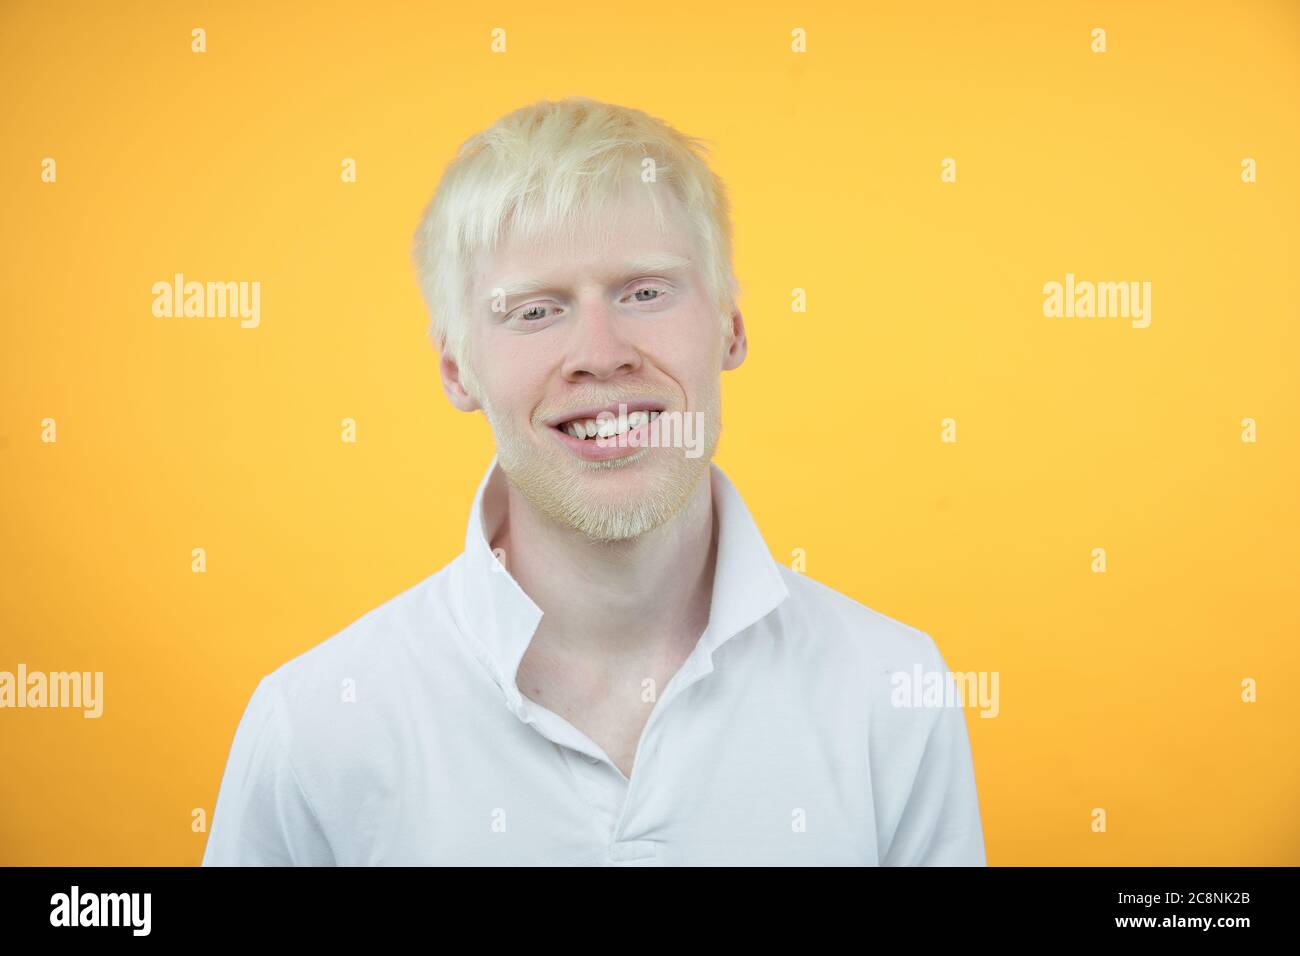 Happy smiling albino man white skin hair studio dressed t-shirt isolated yellow background abnormal deviations unusual appearance abnormality Beautiful people Stock Photo